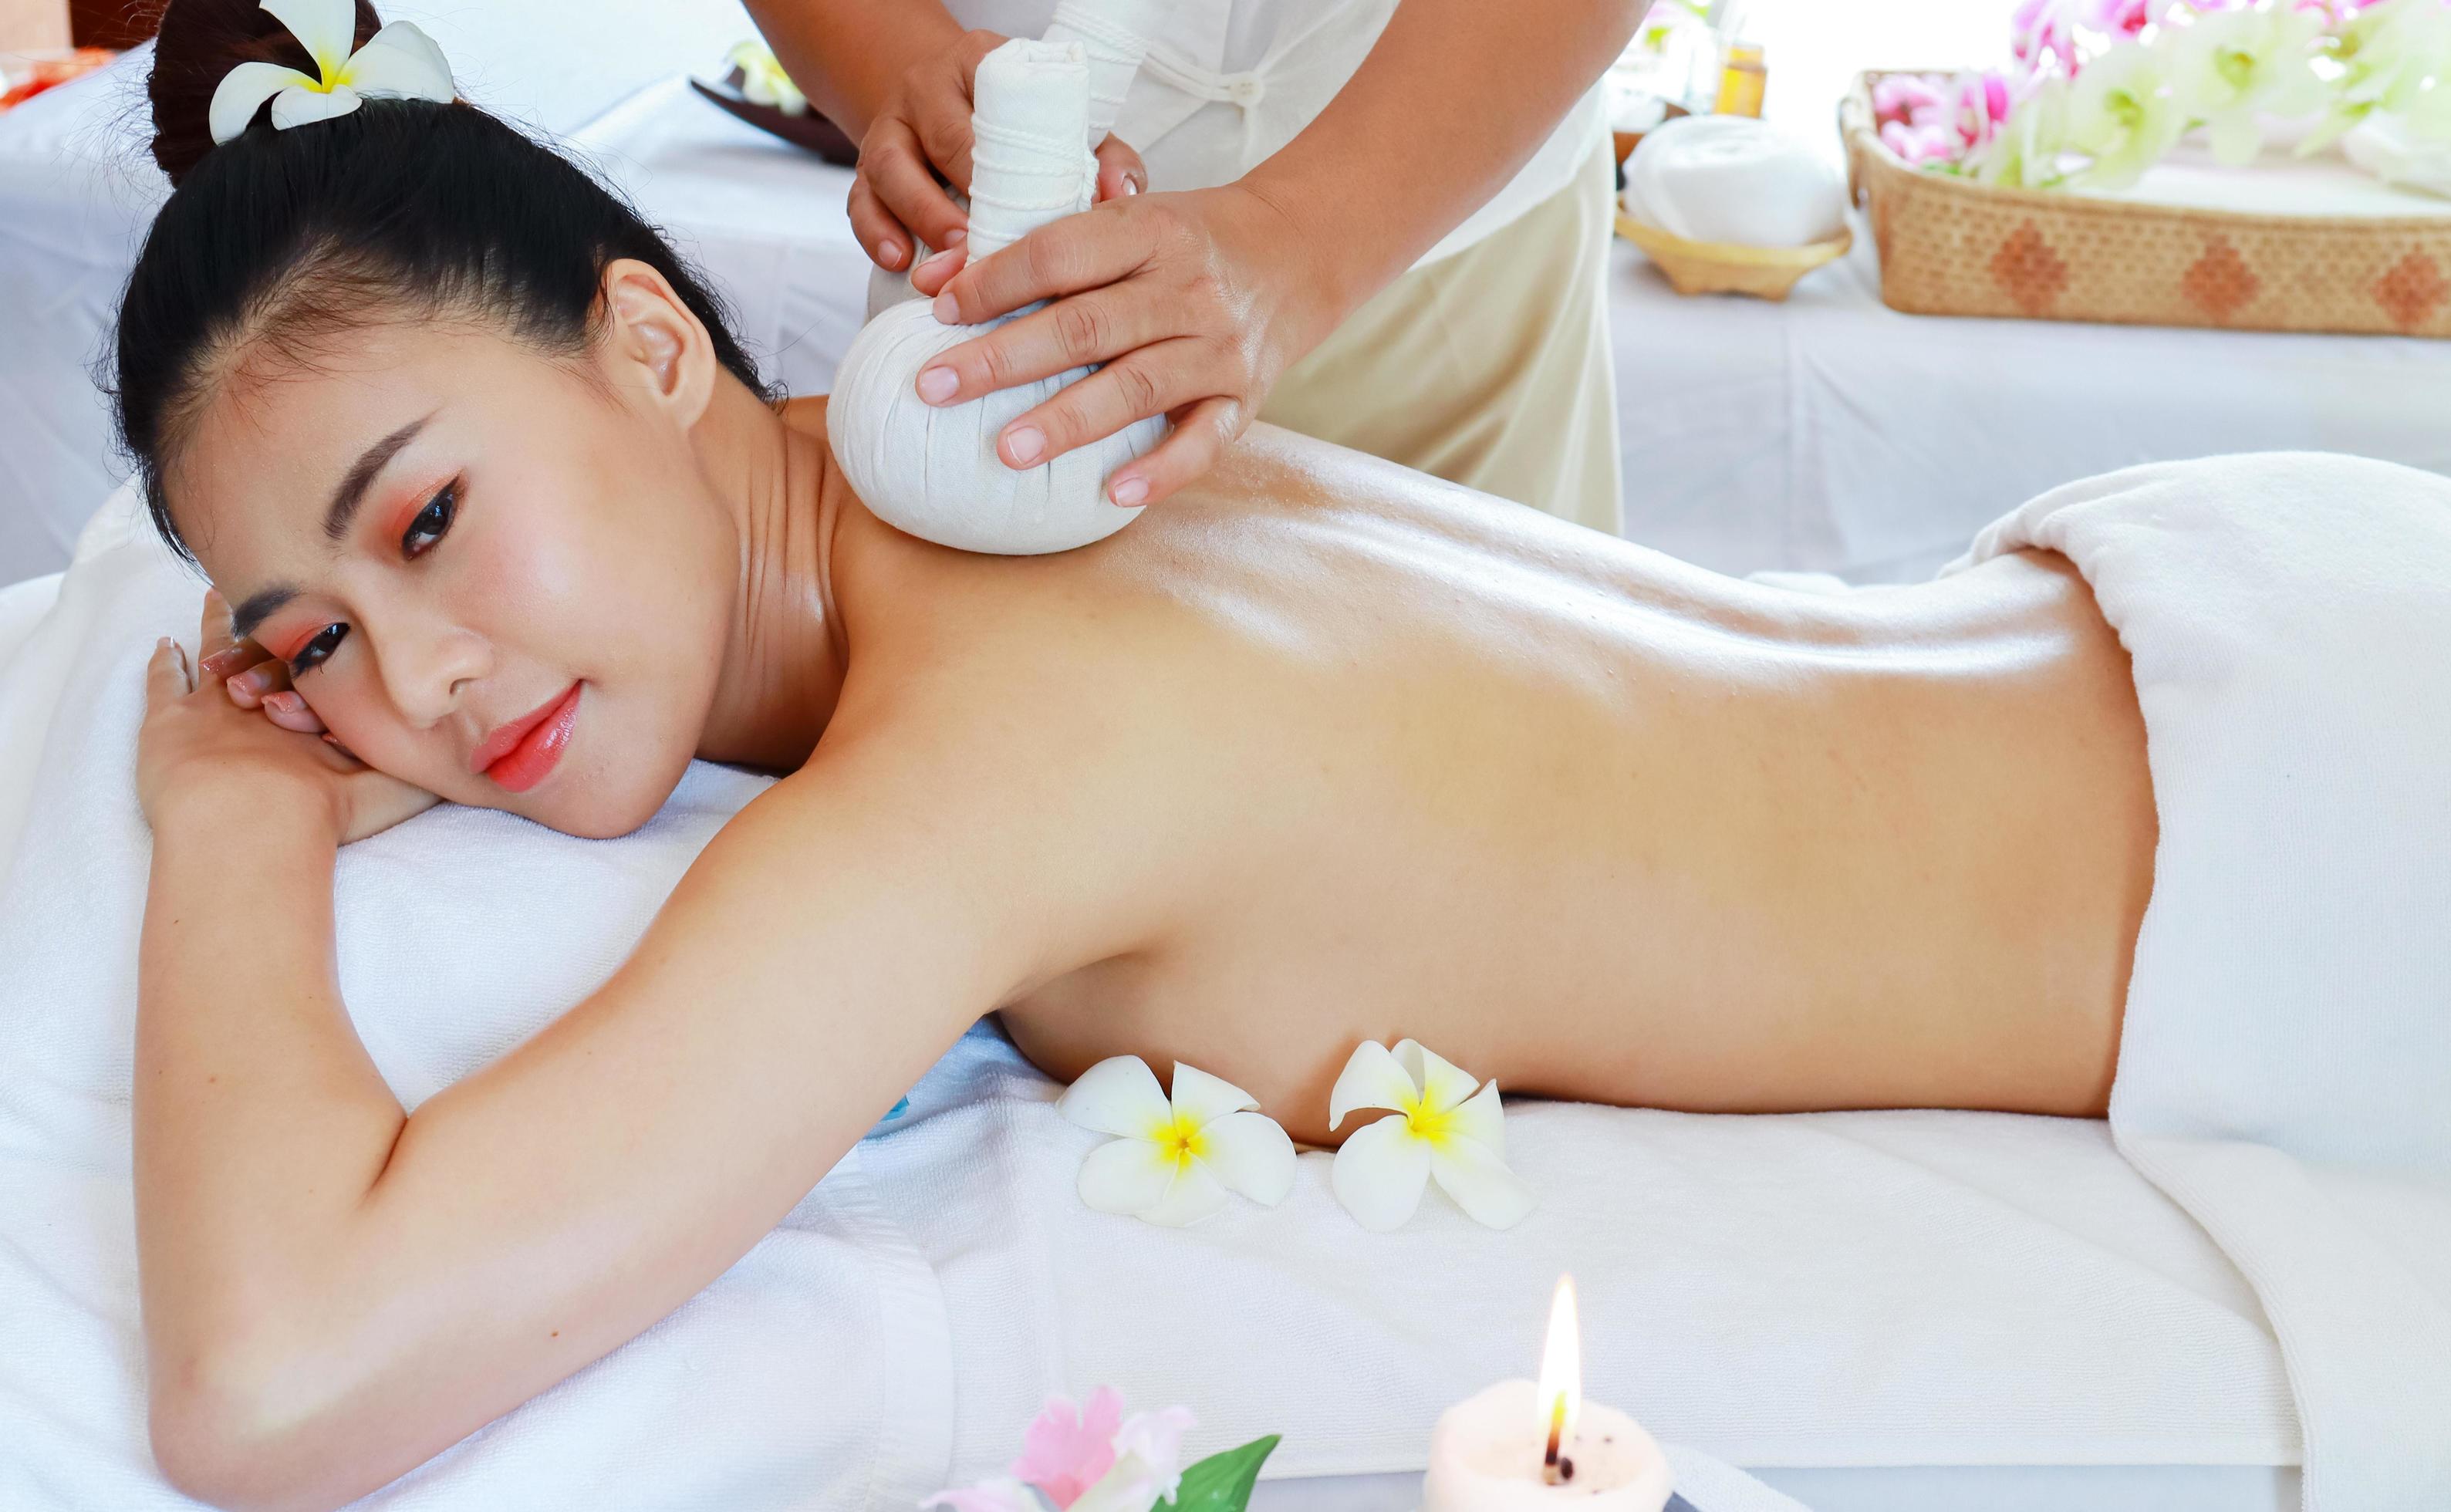 armand plaza recommends asian massage pic pic